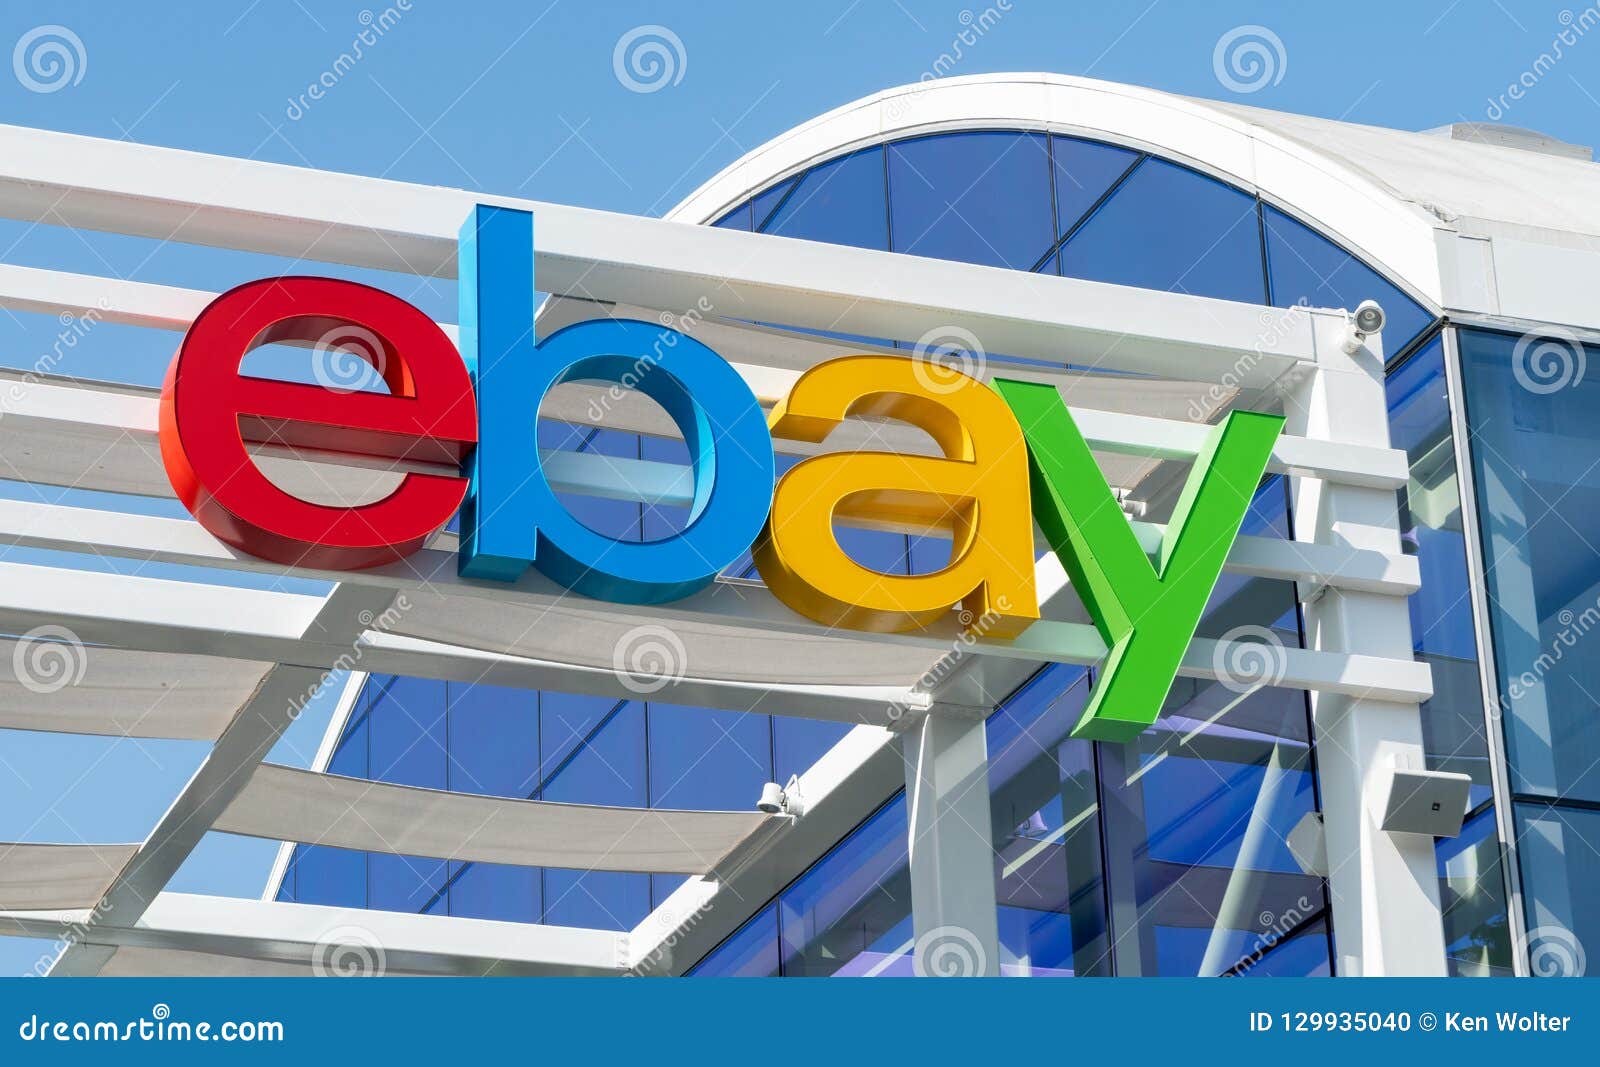 Ebay World Headquarters Exterior And Logo Editorial Image Image Of Site Auction